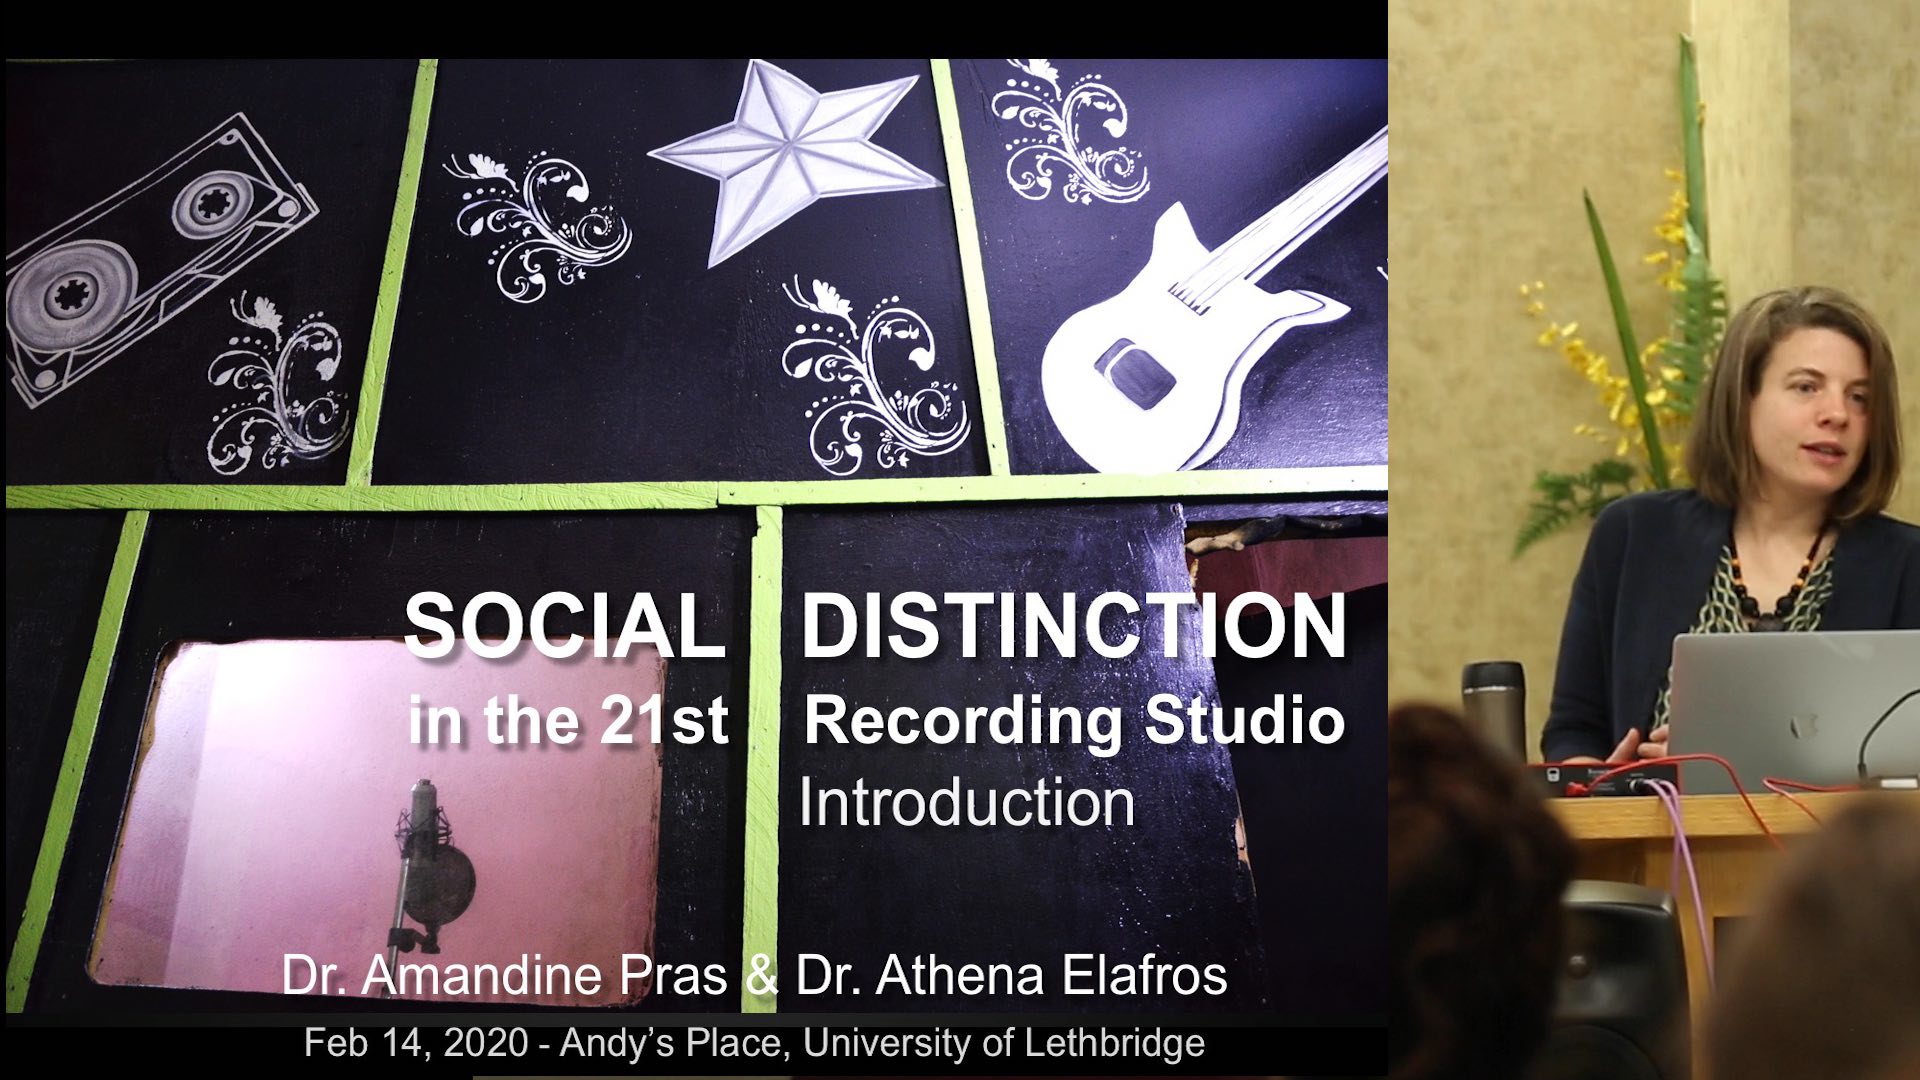 Introduction to Social distinction in the 21st recording studio by Amandine Pras